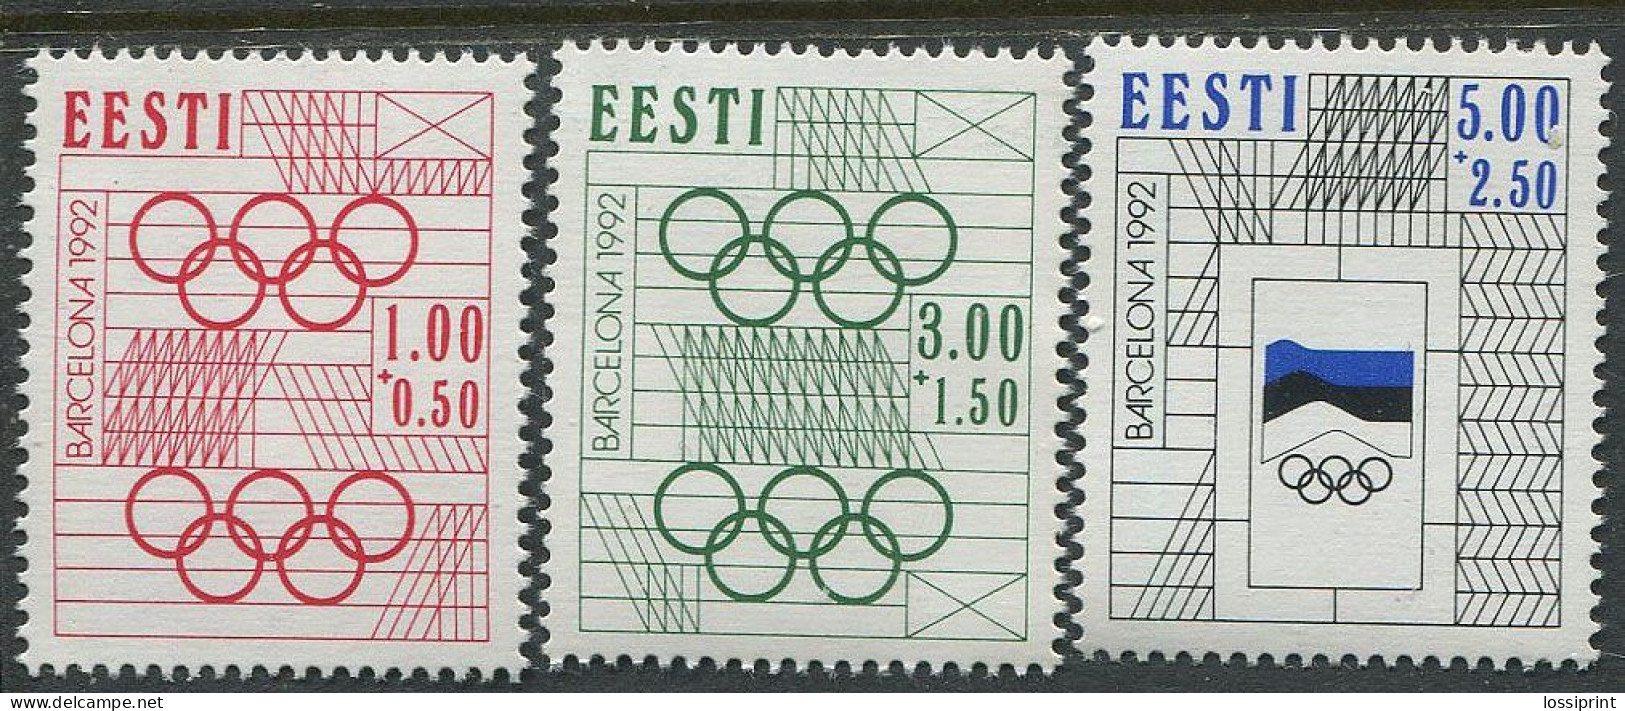 Estonia:Unused Stamps Serie Barcelona Olympic Games, 1992, MNH - Ete 1992: Barcelone